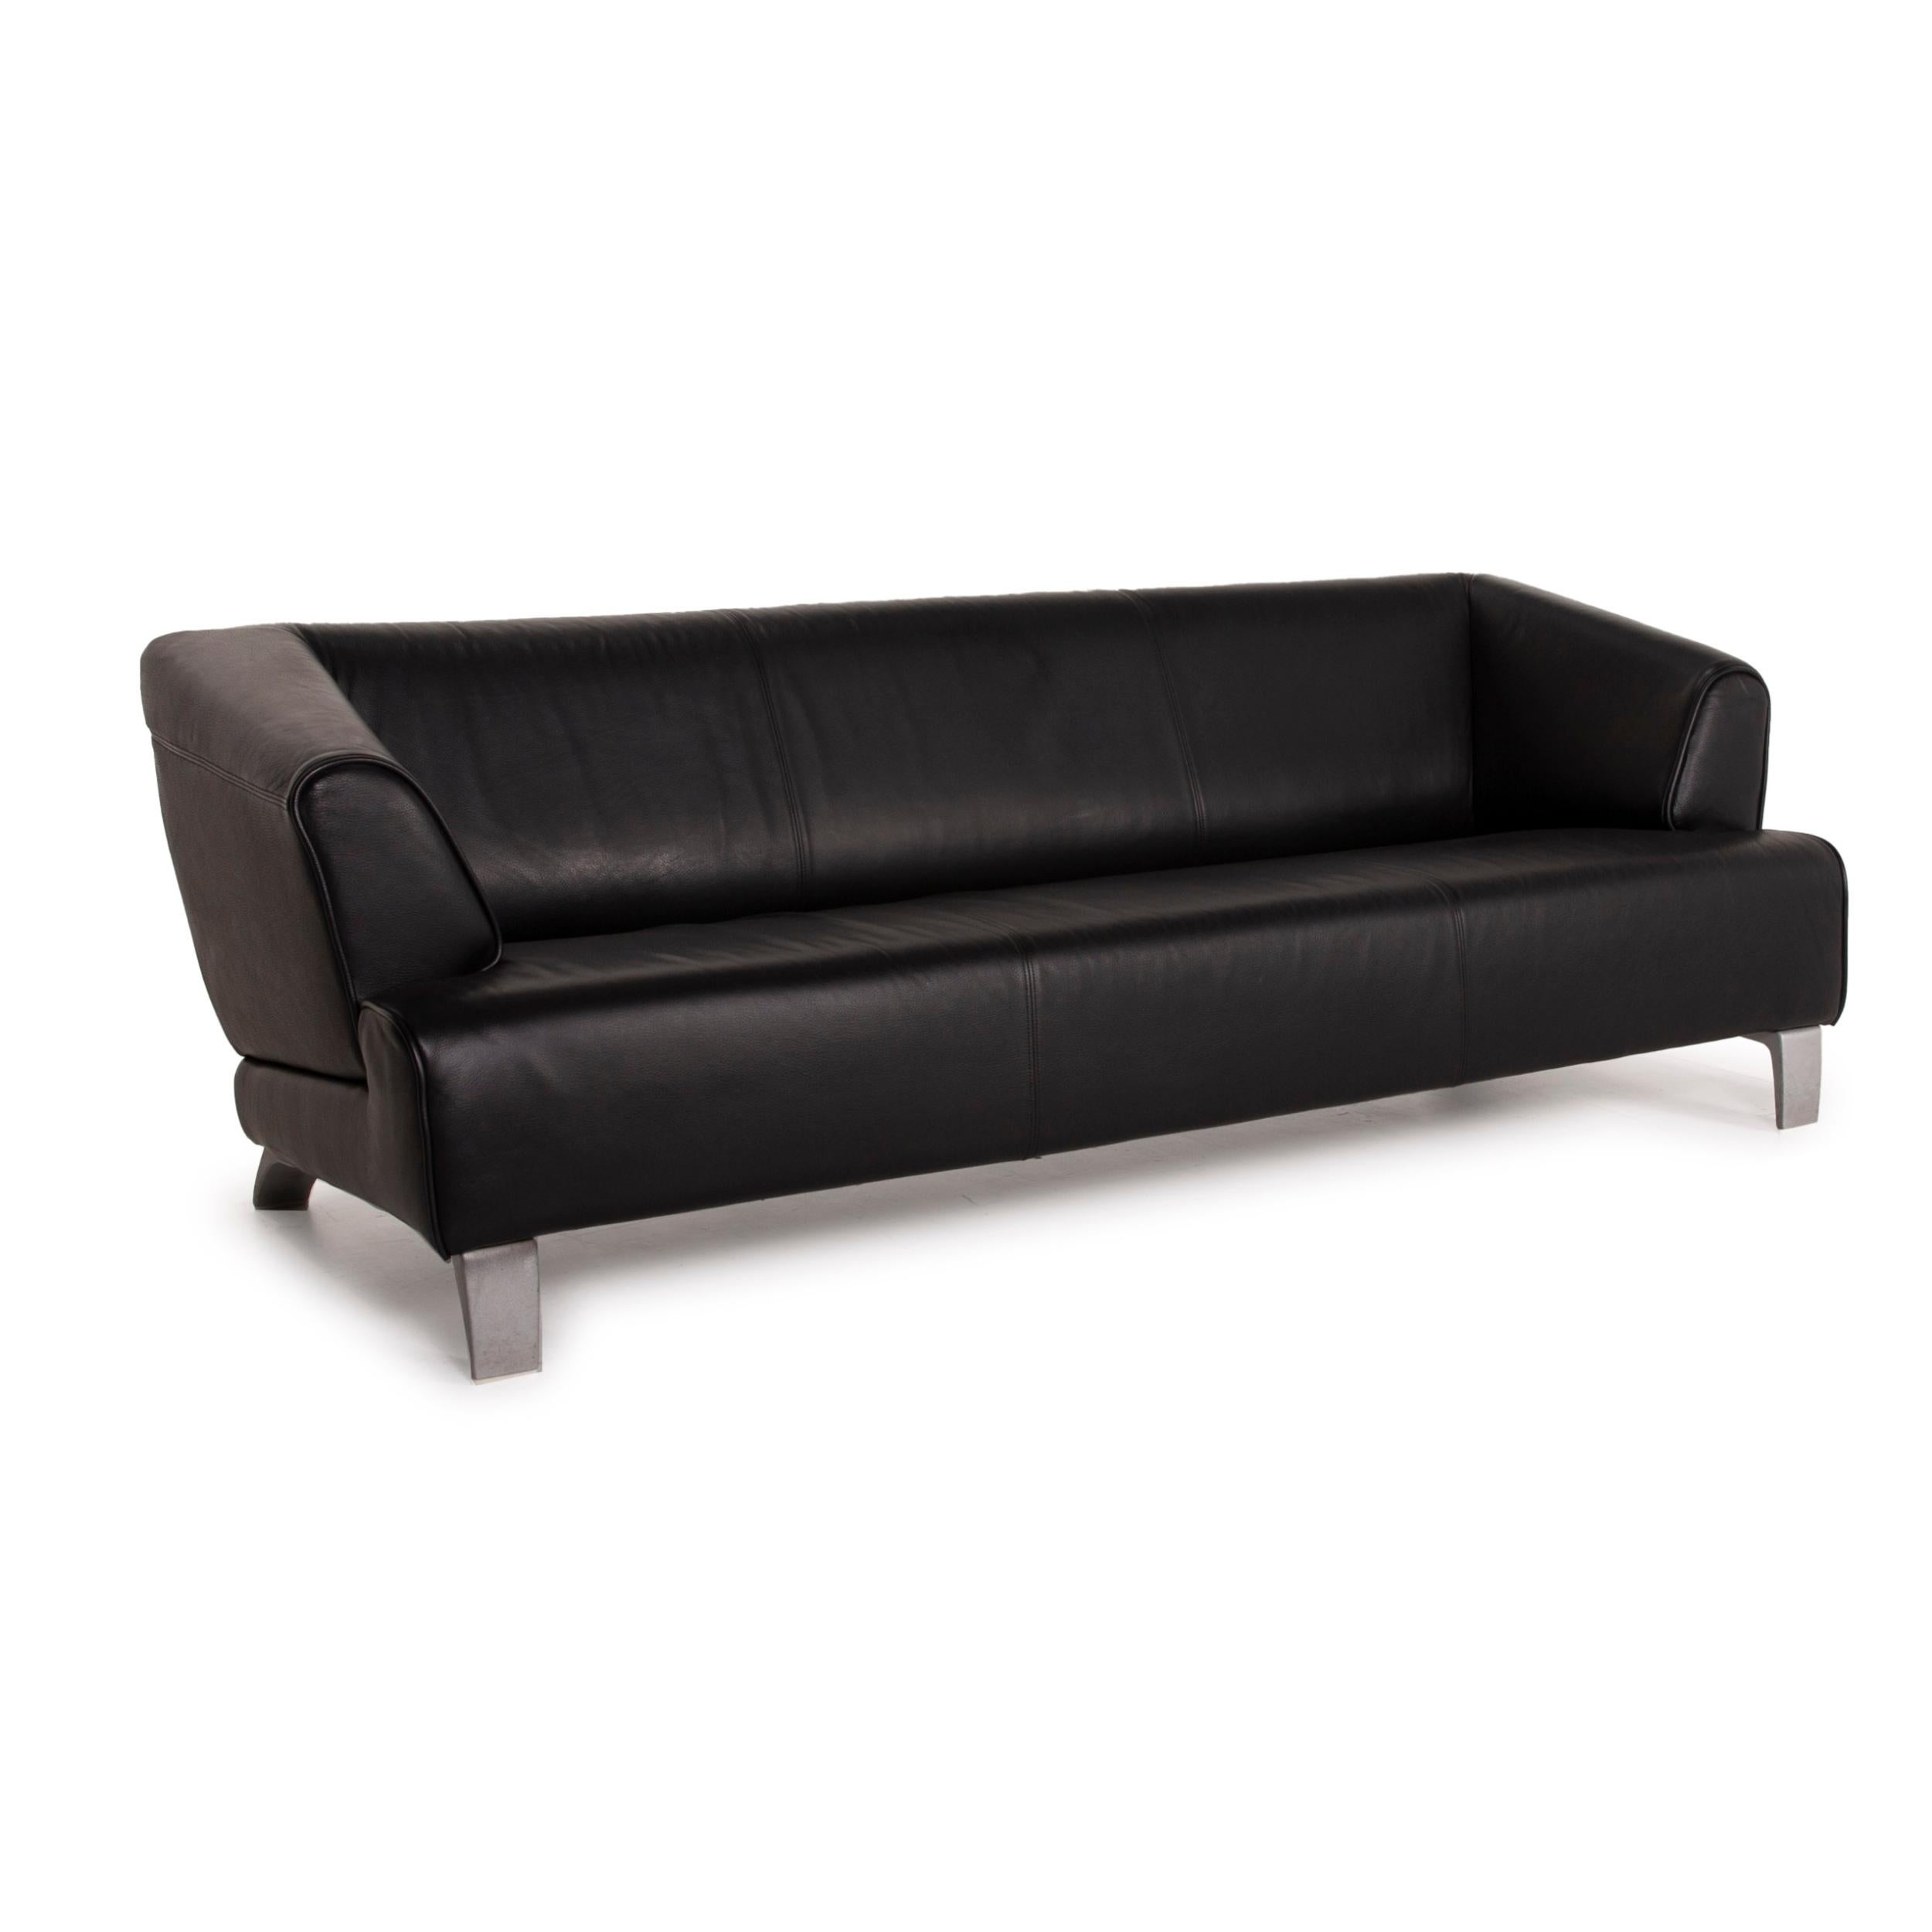 Contemporary Rolf Benz 2300 Leather Sofa Black Three-Seater